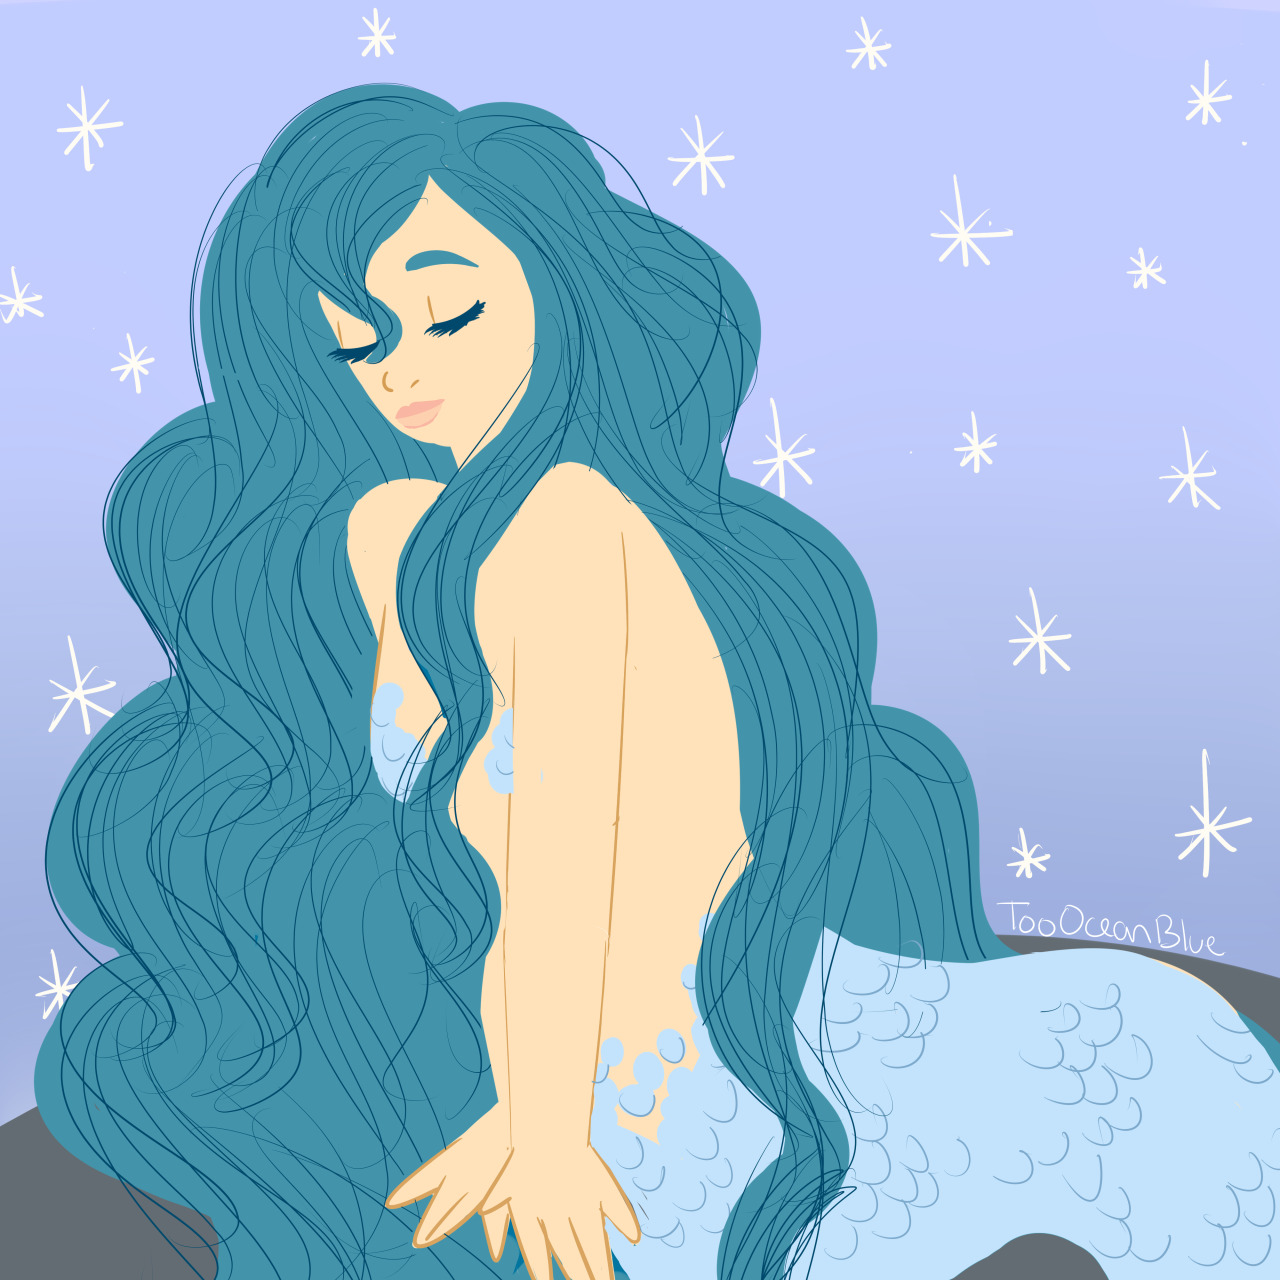 [ID: Several digital illustrations of a blue-haired mermaid, drawn between 2016 and 2022, highlighting the artists improvement over that time. The first two, from 2016 and 2017, are partially lineless, with heavy lineart on the hair. The first features no shading and the second features cell shading. A stylized starry sky decorates the backgrounds of both. The third drawing, from early 2018, is drawn with thin, sketchy blue lineart and features a desaturated, more realistic night sky. The fourth drawing, from late 2018, is partially lineless and more saturated. The shading is light and smoothly blended. Rather than a night sky, the backdrop is a light sky with two celestial bodies, presumably a sun and a moon. The artist has begun to illustrate some detail in the water. The final drawing is from 2022. It is partially lineless and features slightly textured shading. The night sky is slightly more realistic, and features two moons. End ID.]Improvement on one of the first digital drawings I ever did when I first got my tablet :) #mermaids#art#improvement#oceanarts